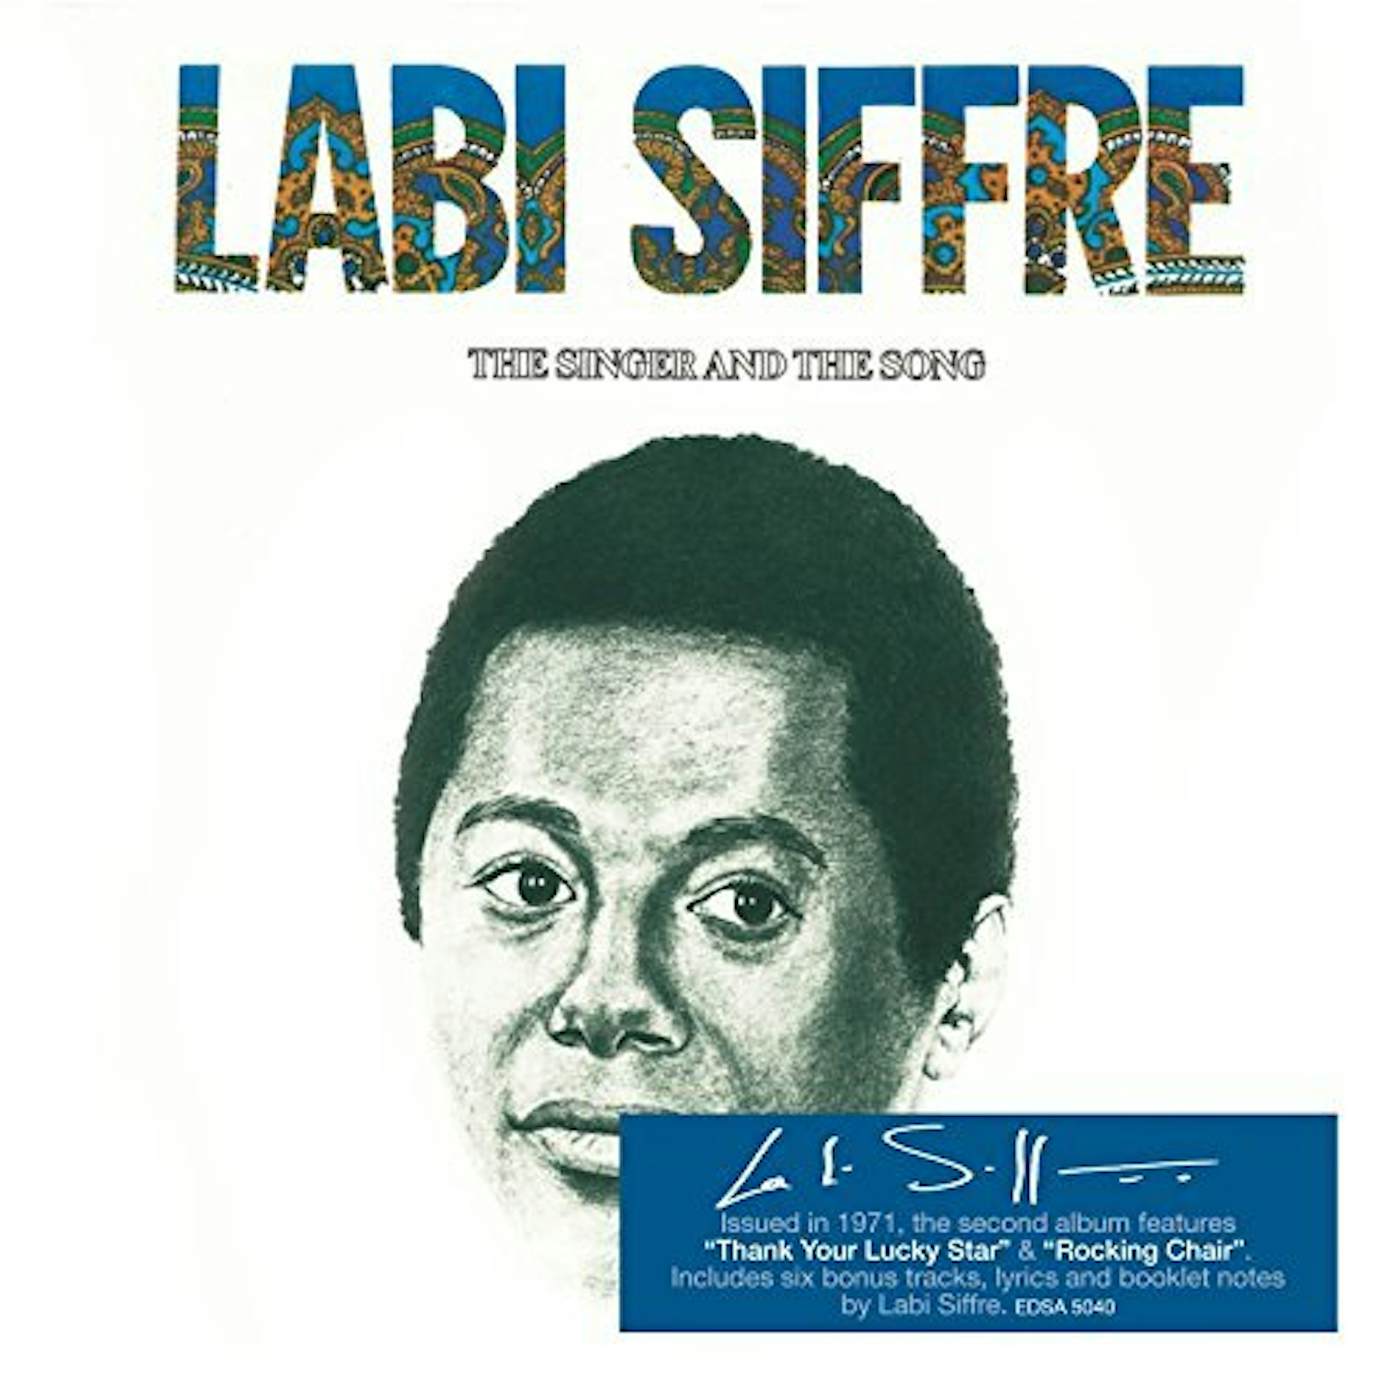 Labi Siffre SINGER & THE SONG CD